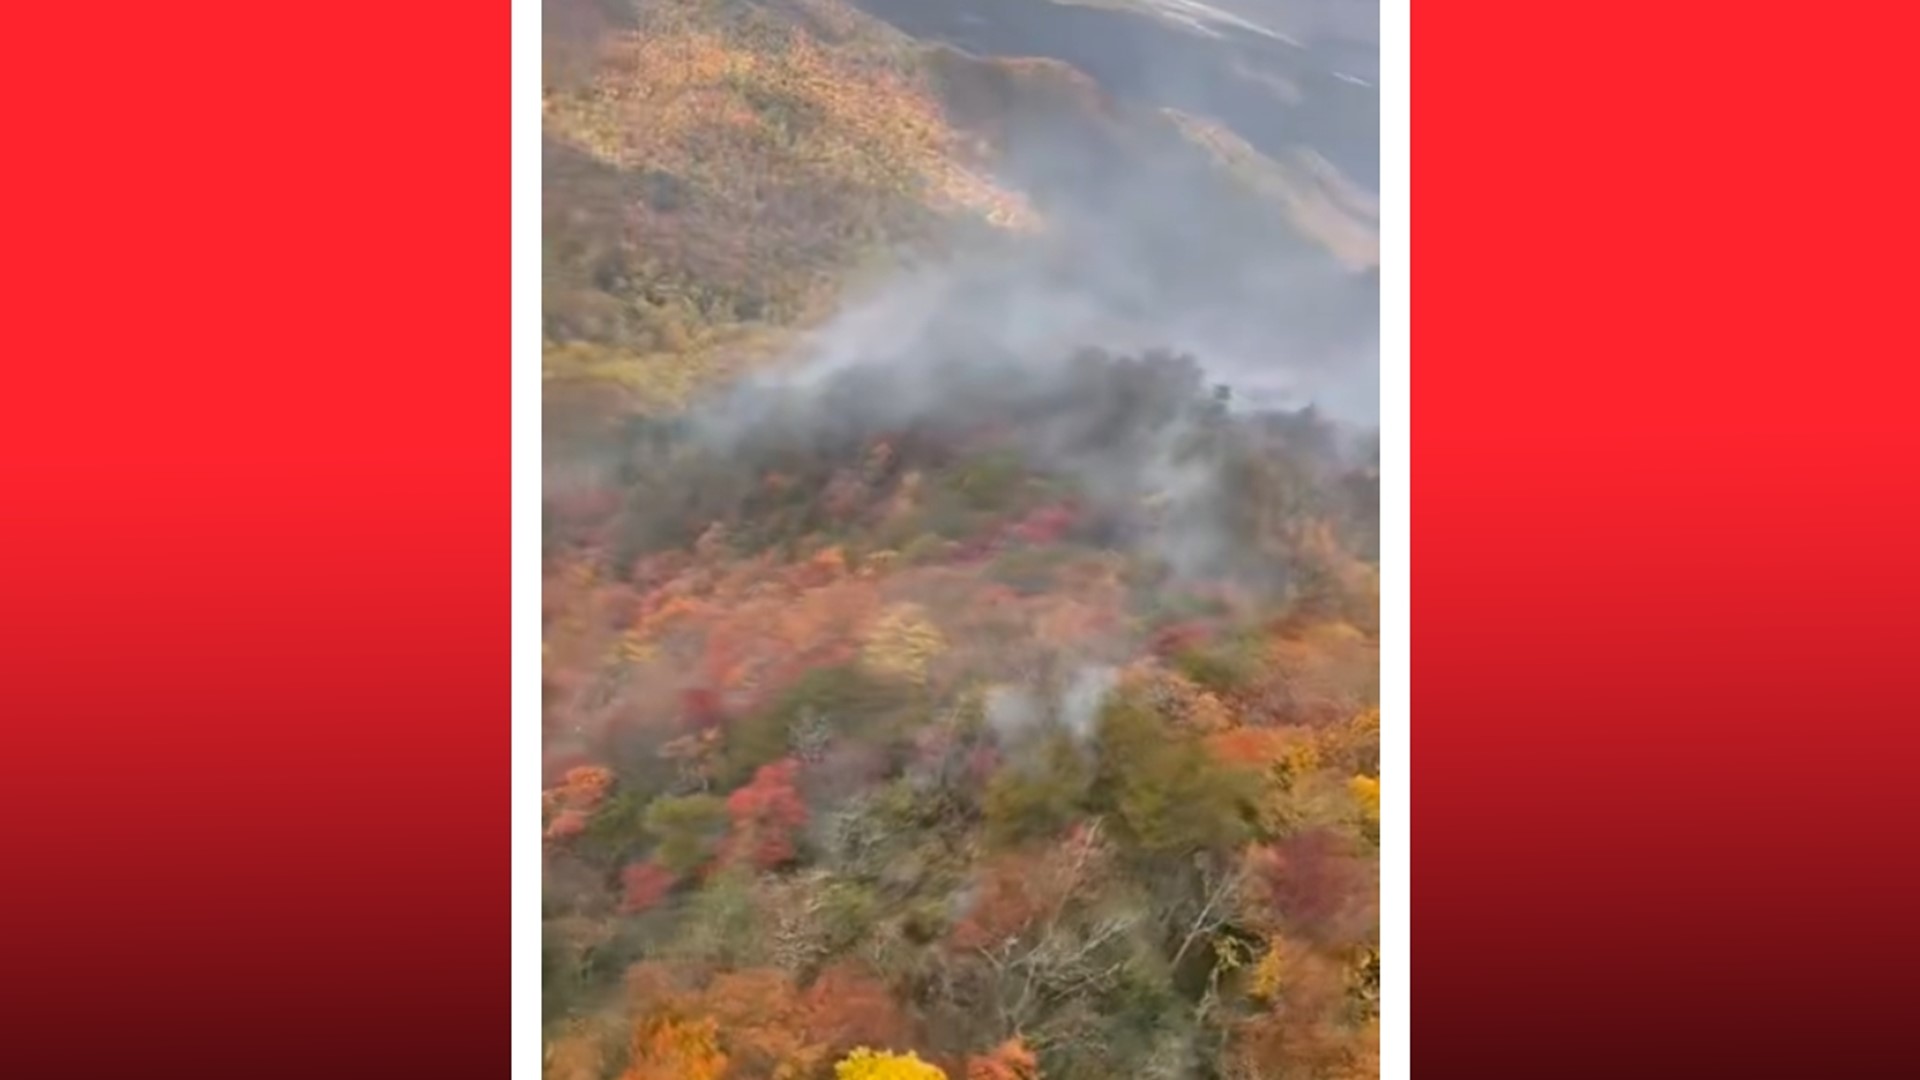 Crews said the fire is continuing to spread a week after it started, but no structures are being threatened yet. (Video: U.S. Forest Service)